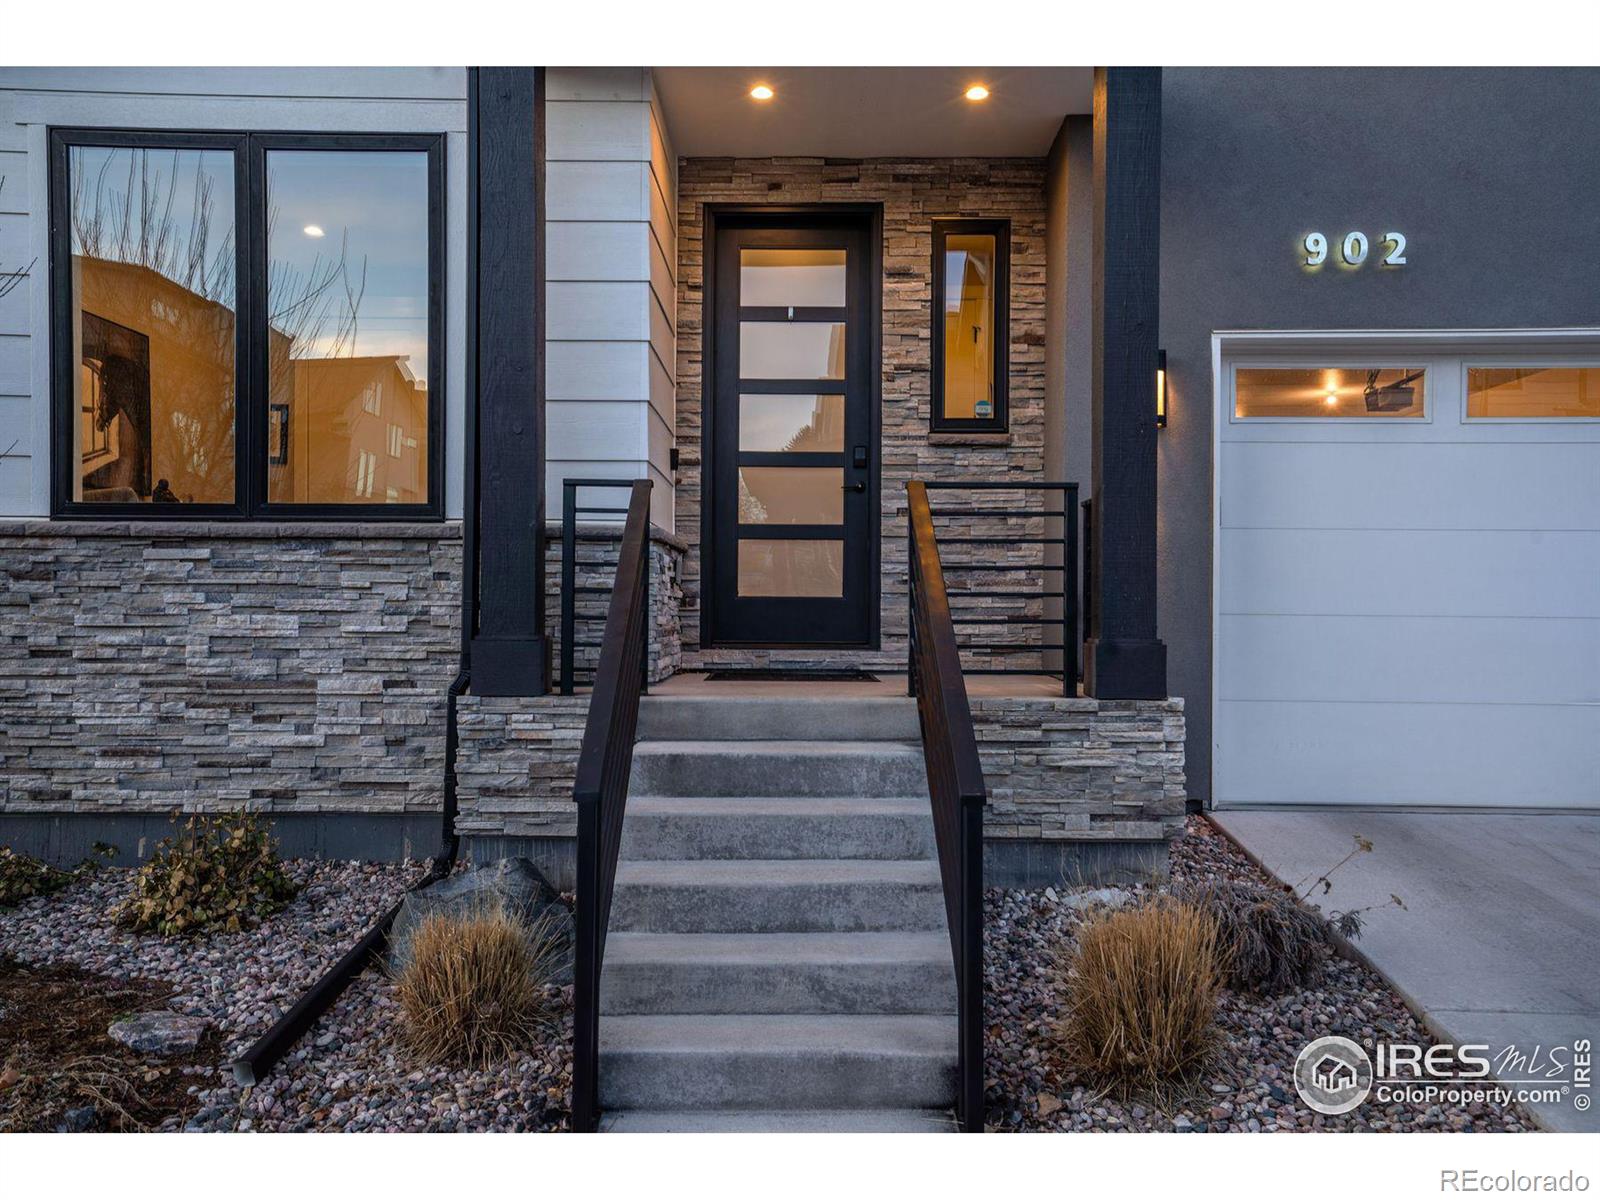 Report Image for 902  Water Course Way,Fort Collins, Colorado